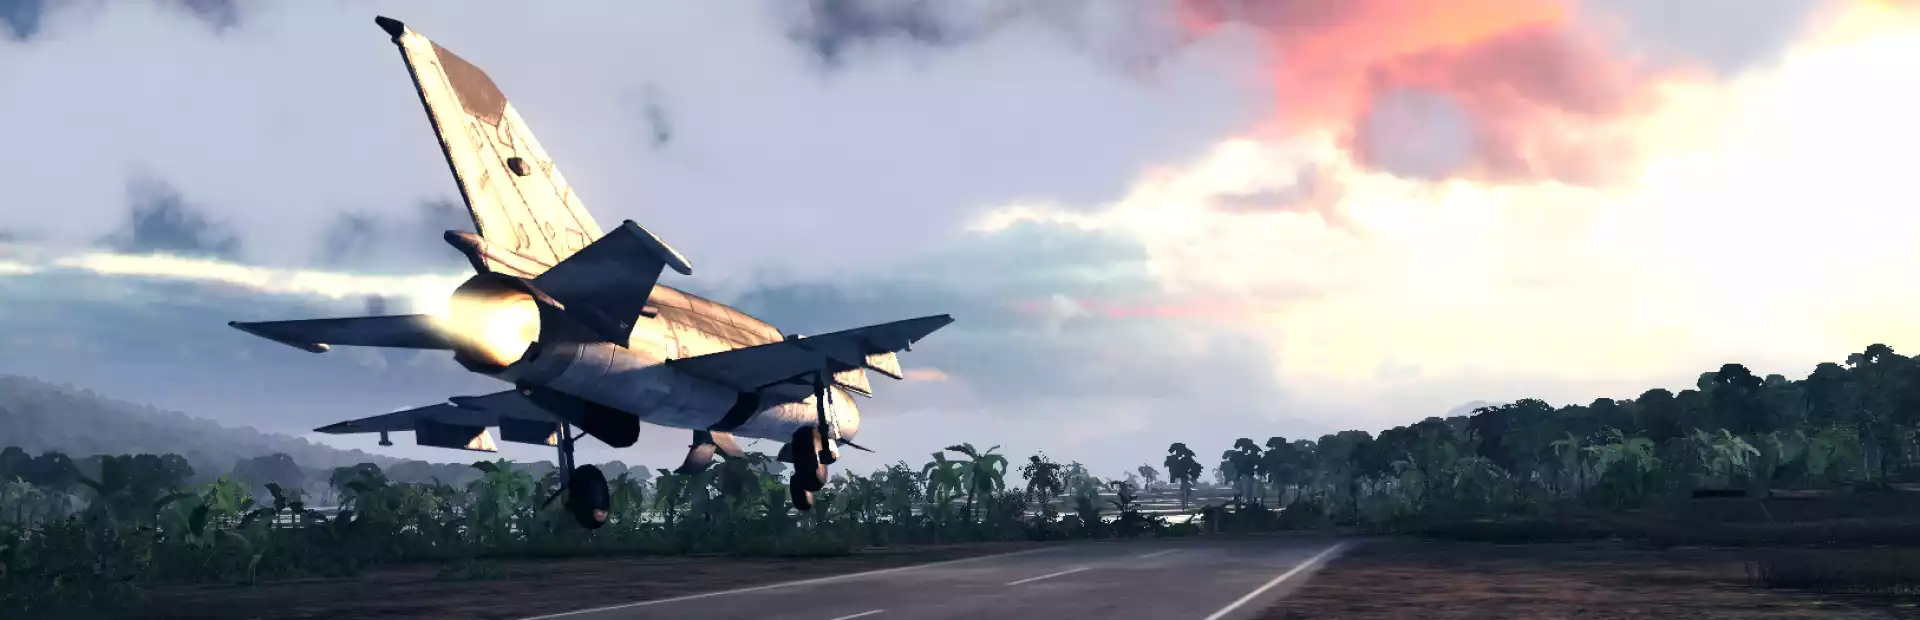 Air Conflicts: Vietnam Steam Key China